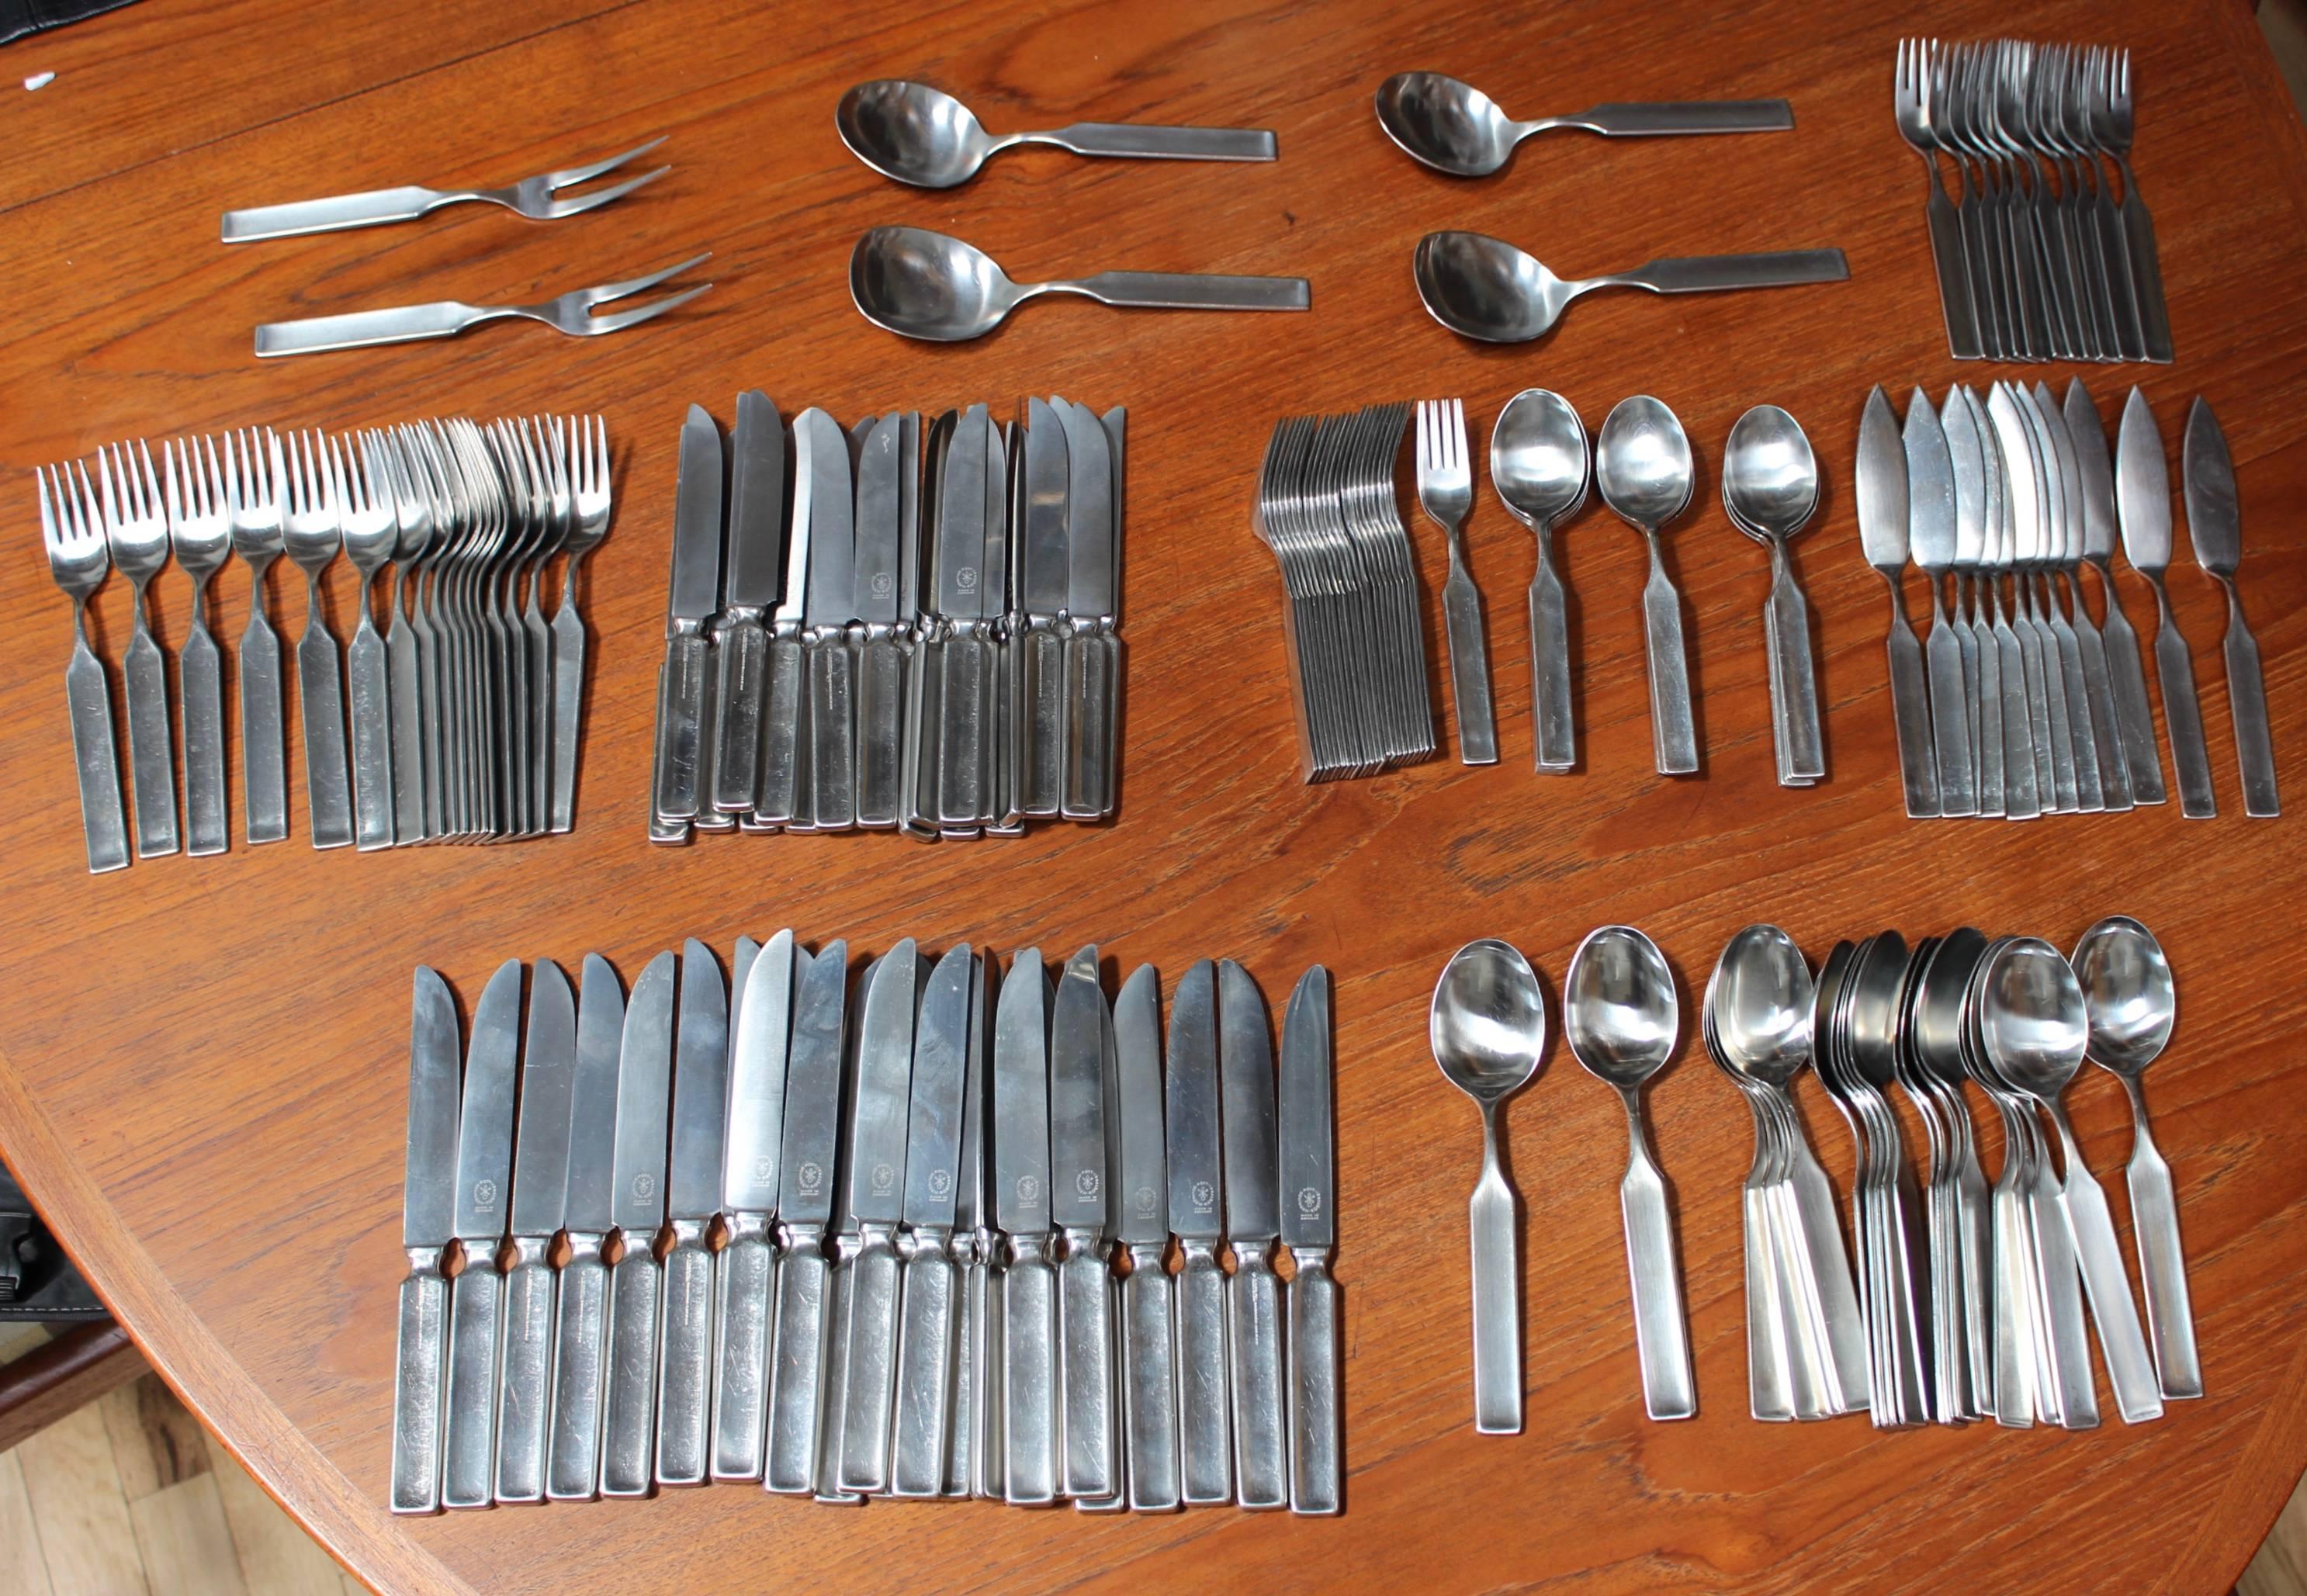 Stunning set of 1960s modern C. Hugo Pott No 2727 flatware. 8 place setting for twelve with six serving pieces plus 57 extra pieces 

Set includes: 
17 tea spoons
22 soup spoons
24 salad forks
17 dinner forks
22 salad knives
24 dinner